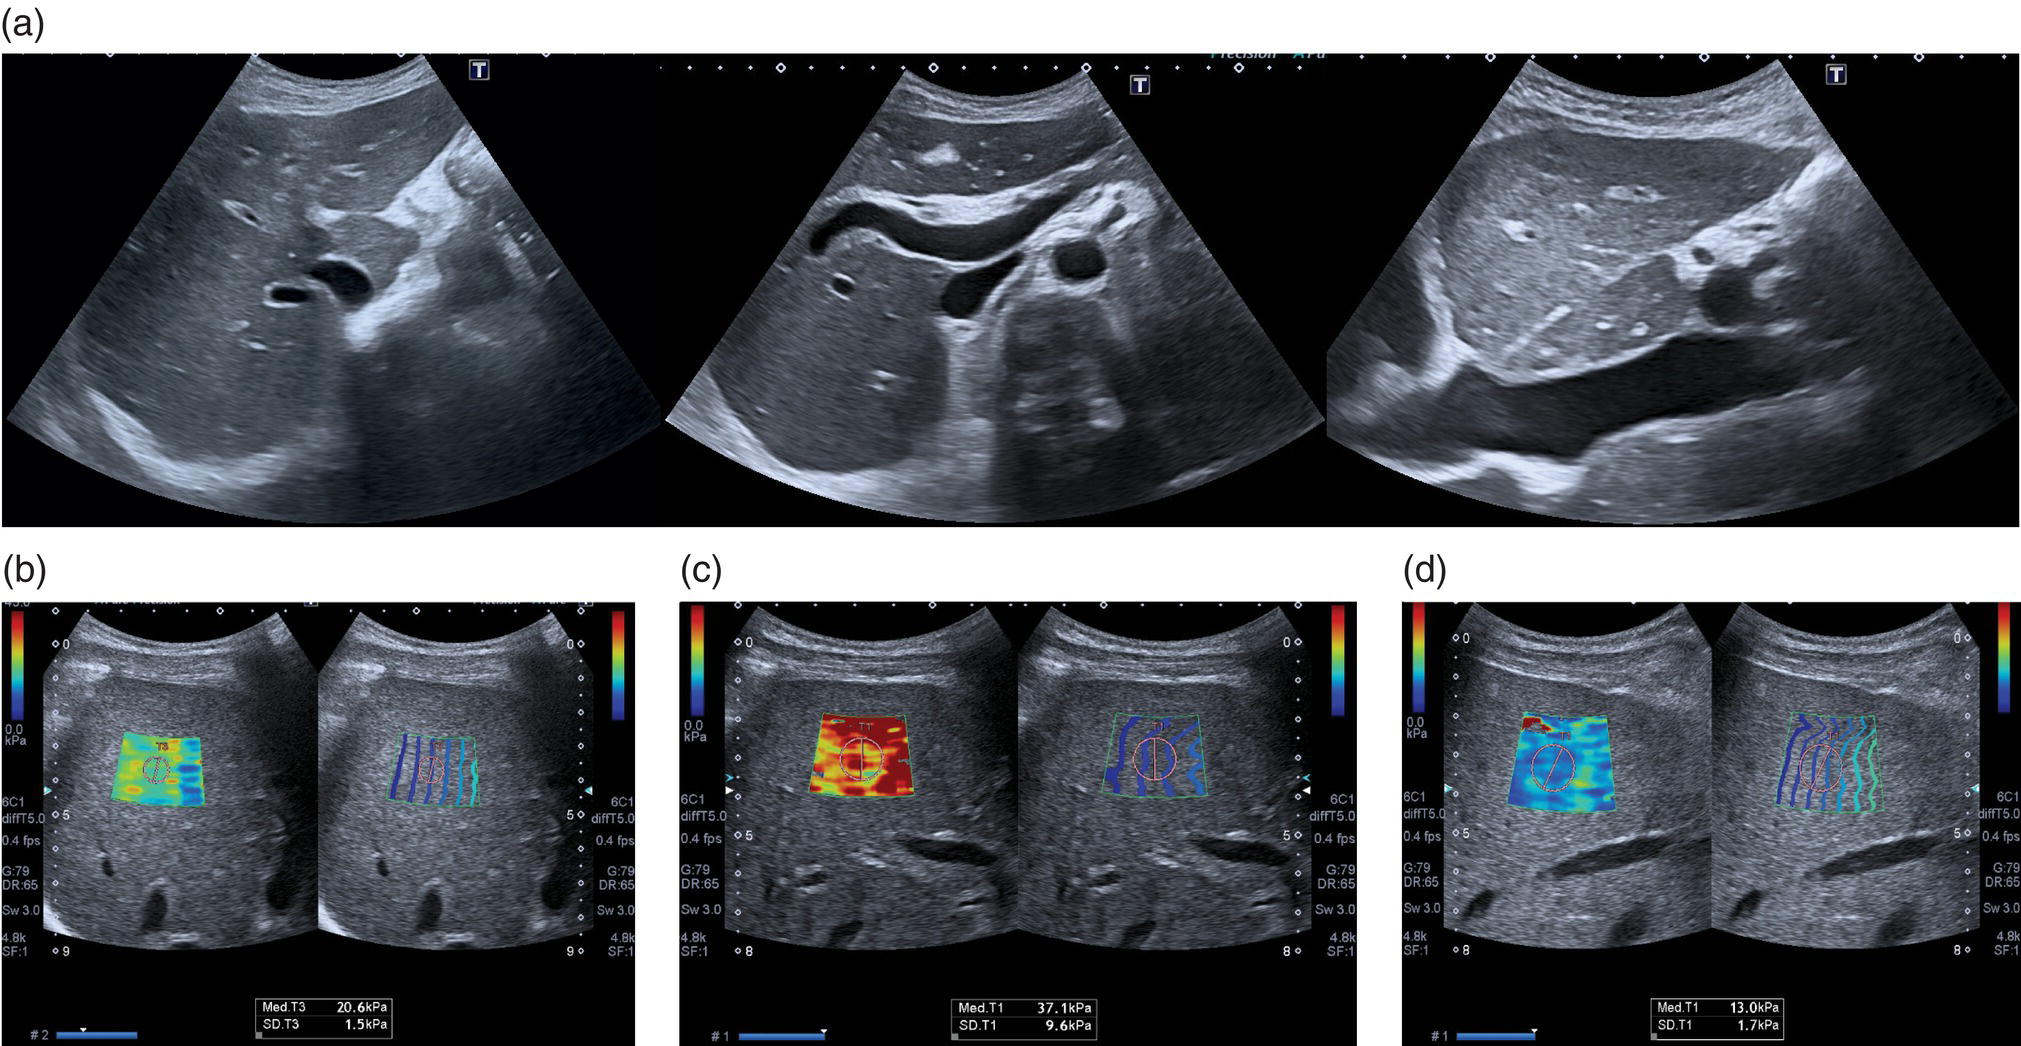 Two sets of scan images. A. The scan images shows the features in keeping with chronic liver disease. (b) The scan image shows the high LS results in keeping with cirrhosis. (c) At one week biochemistry showed further worsening of liver function tests and transaminase, with a simultaneous increase of L S. (d) Liver biopsy was carried out and the patient was commenced on high-dose steroids.